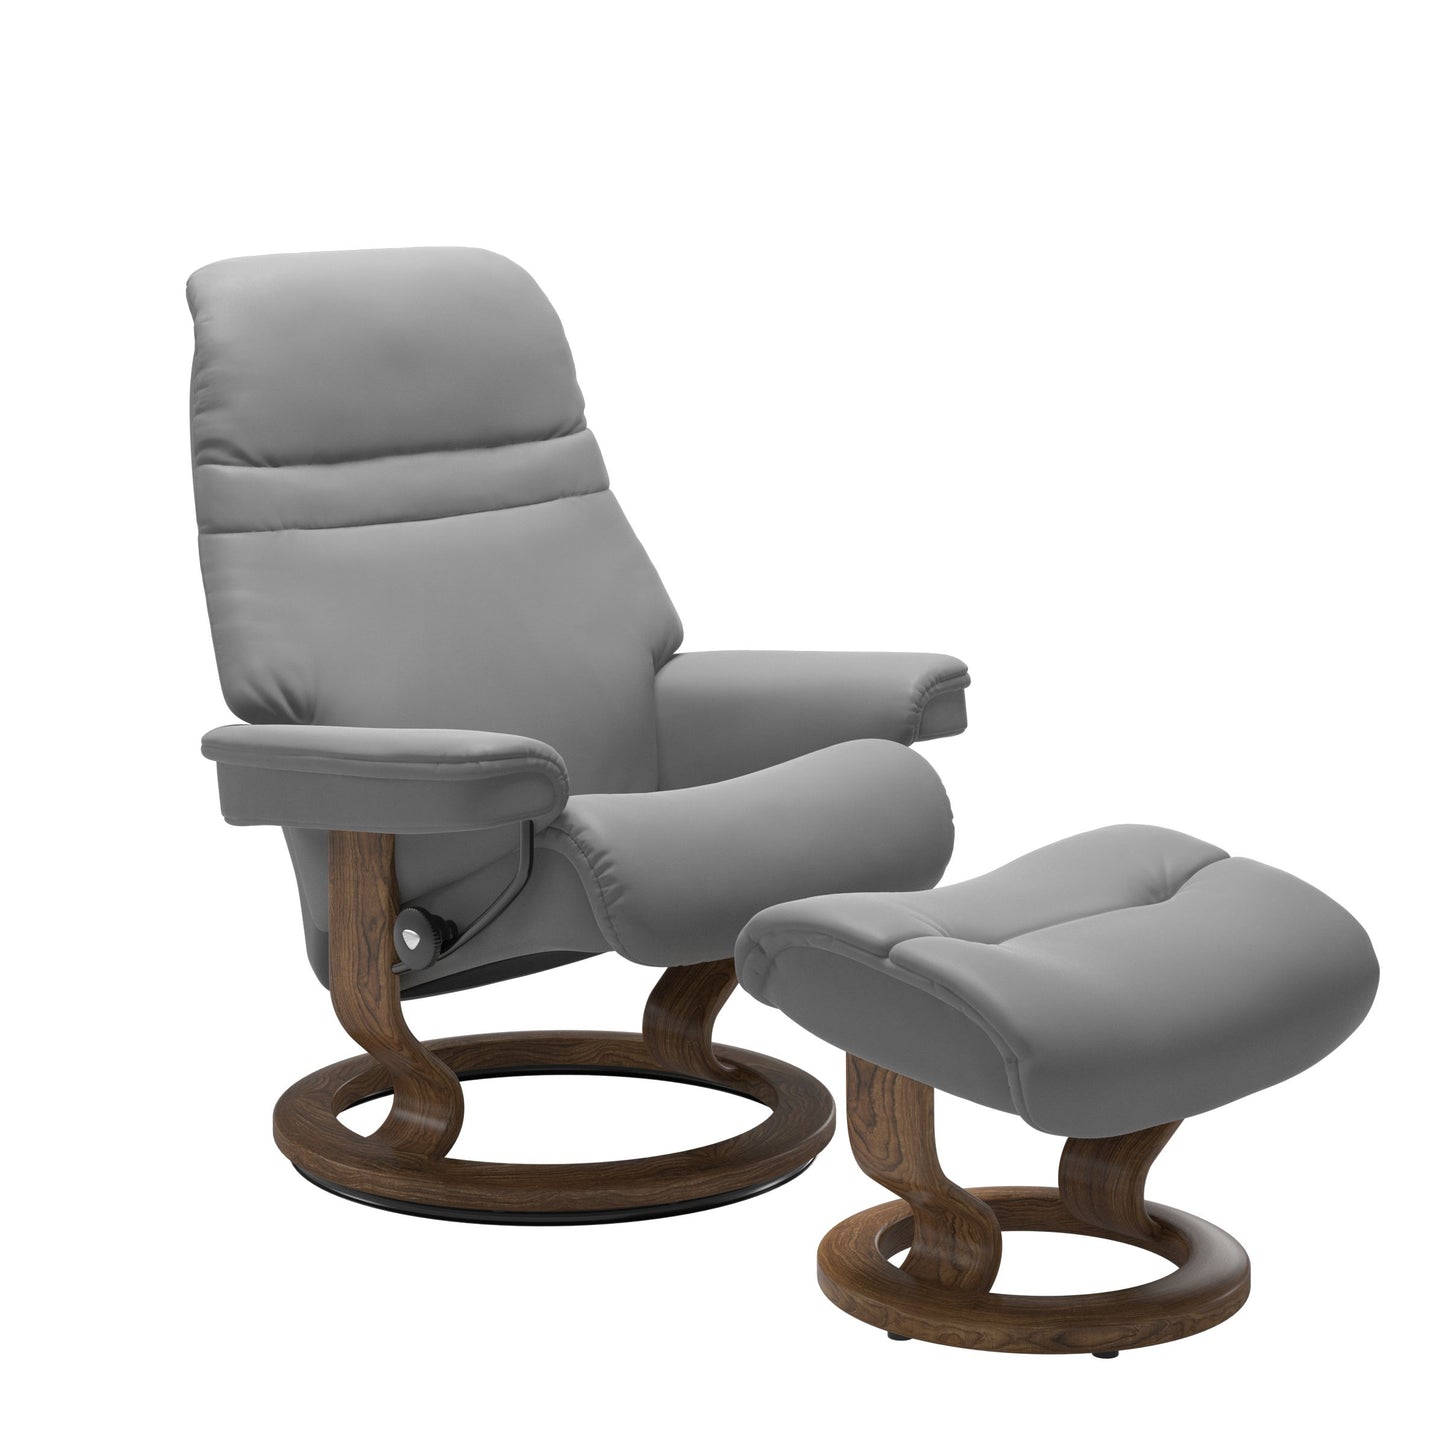 Sunrise Small Recliner Chair & Stool Classic Base by Stressless